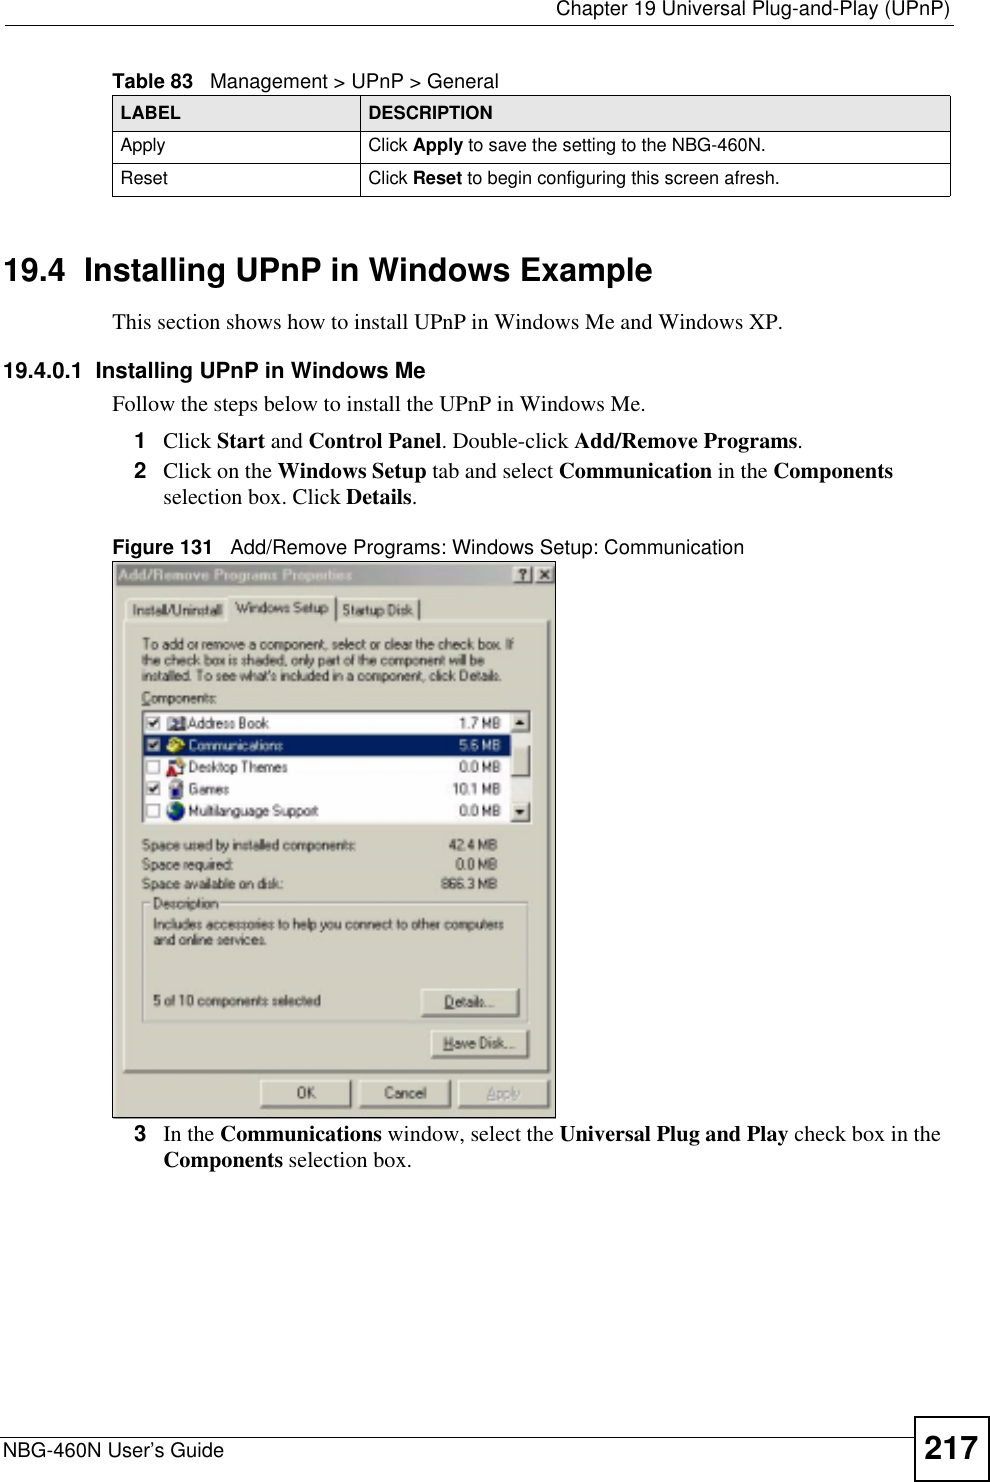  Chapter 19 Universal Plug-and-Play (UPnP)NBG-460N User’s Guide 21719.4  Installing UPnP in Windows ExampleThis section shows how to install UPnP in Windows Me and Windows XP. 19.4.0.1  Installing UPnP in Windows MeFollow the steps below to install the UPnP in Windows Me. 1Click Start and Control Panel. Double-click Add/Remove Programs.2Click on the Windows Setup tab and select Communication in the Componentsselection box. Click Details.Figure 131   Add/Remove Programs: Windows Setup: Communication 3In the Communications window, select the Universal Plug and Play check box in the Components selection box. Apply Click Apply to save the setting to the NBG-460N.Reset Click Reset to begin configuring this screen afresh.Table 83   Management &gt; UPnP &gt; GeneralLABEL DESCRIPTION